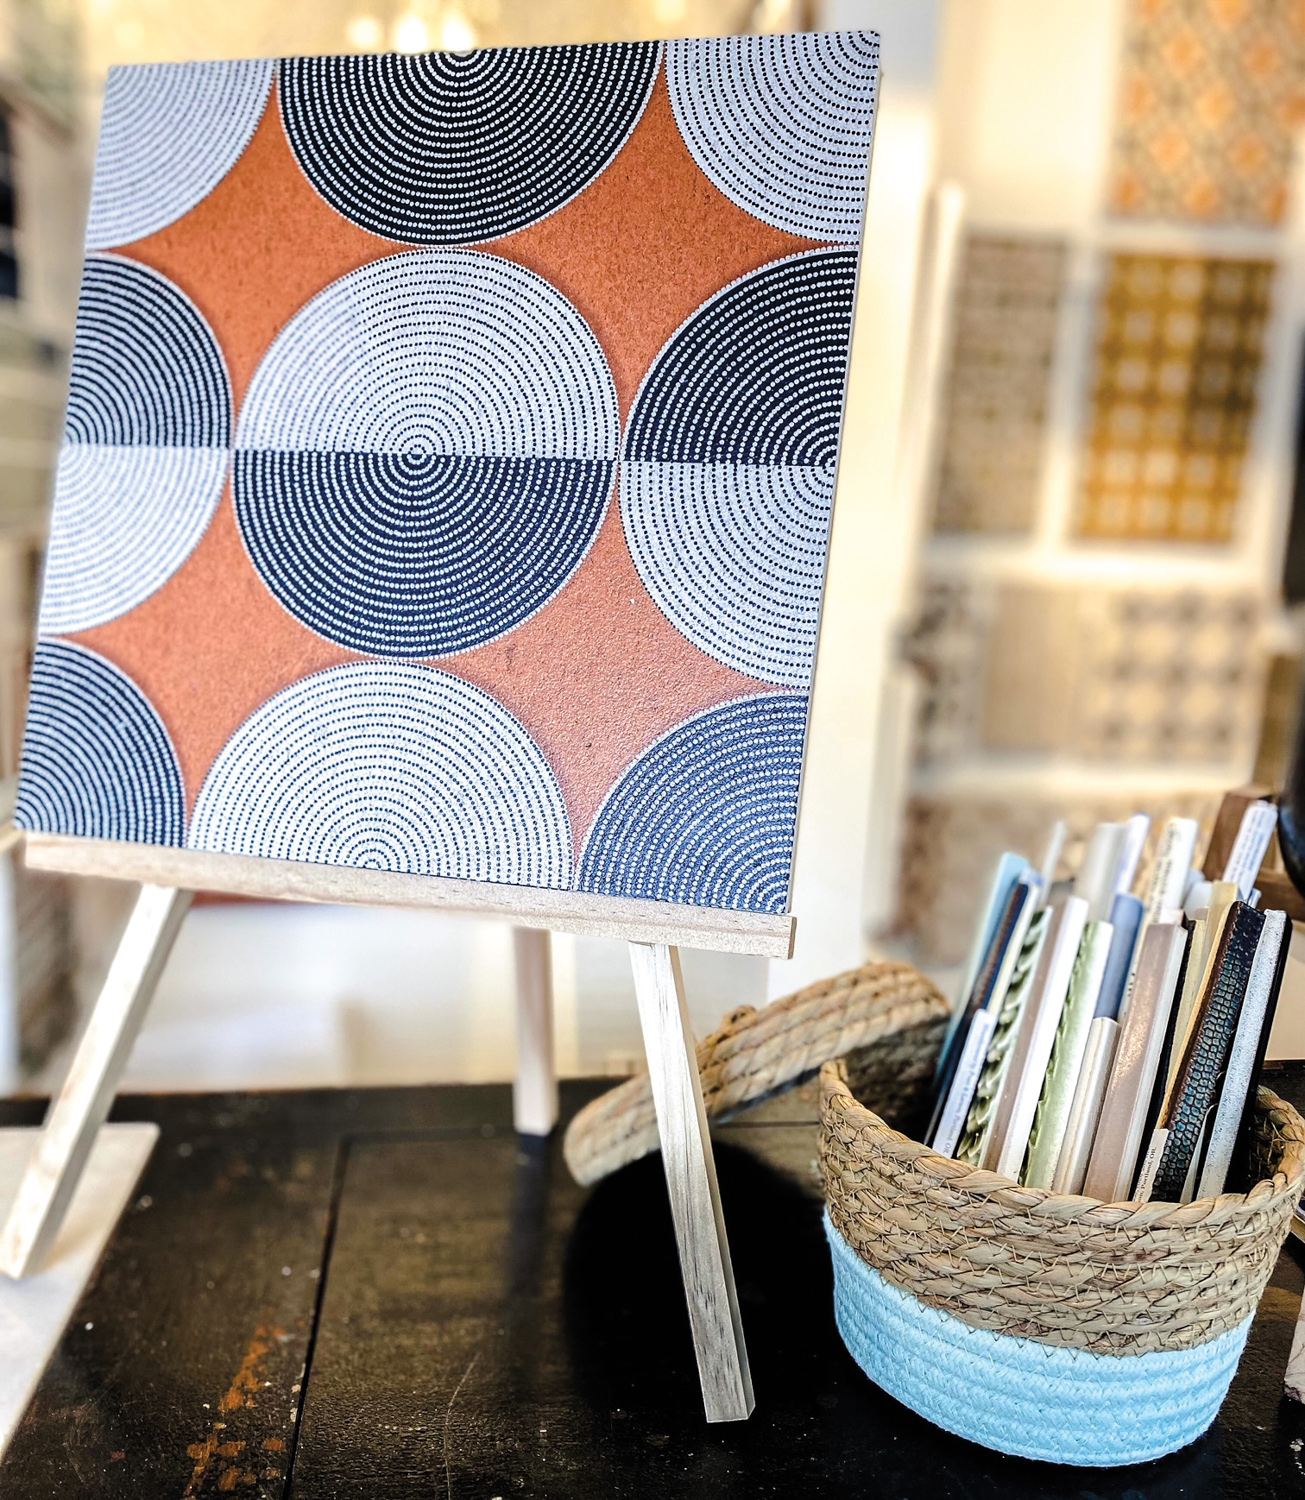 Orange tile with black-and-white circle print on an easel.